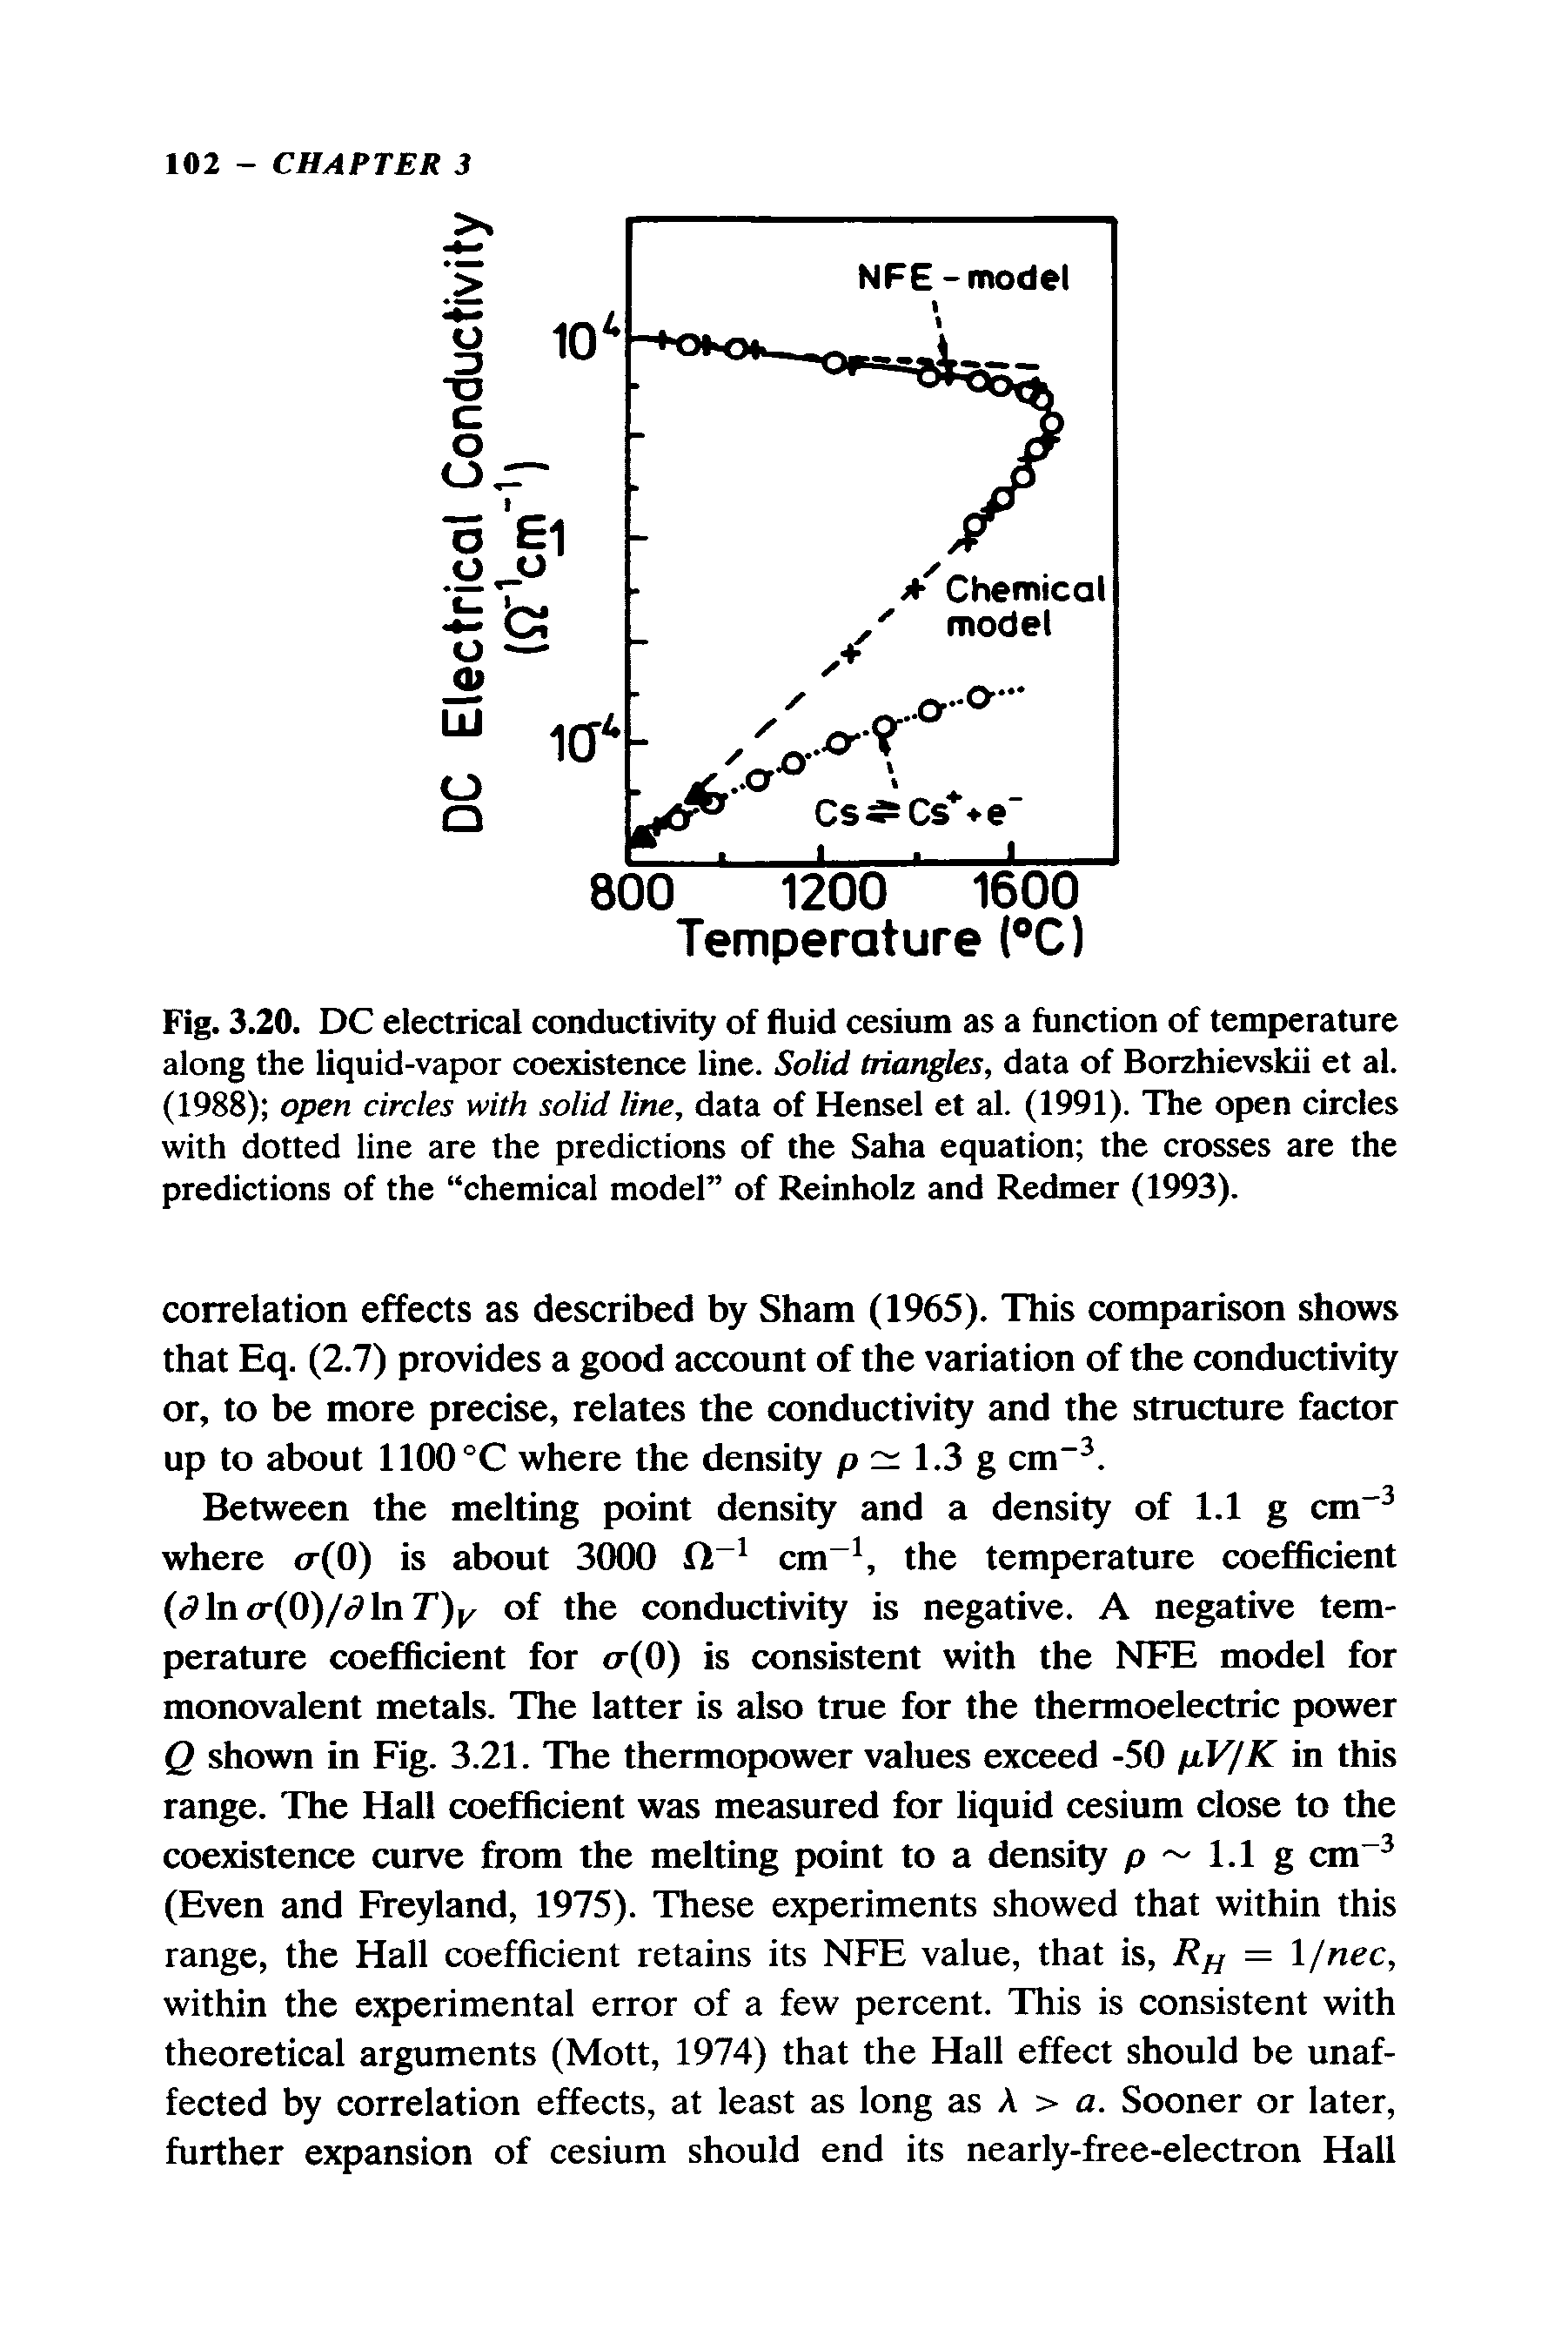 Fig. 3.20. DC electrical conductivity of fluid cesium as a function of temperature along the liquid-vapor coexistence line. Solid triangles, data of Borzhievskii et al. (1988) open circles with solid line, data of Hensel et al. (1991). The open circles with dotted line are the predictions of the Saha equation the crosses are the predictions of the chemical model of Reinholz and Redmer (1993).